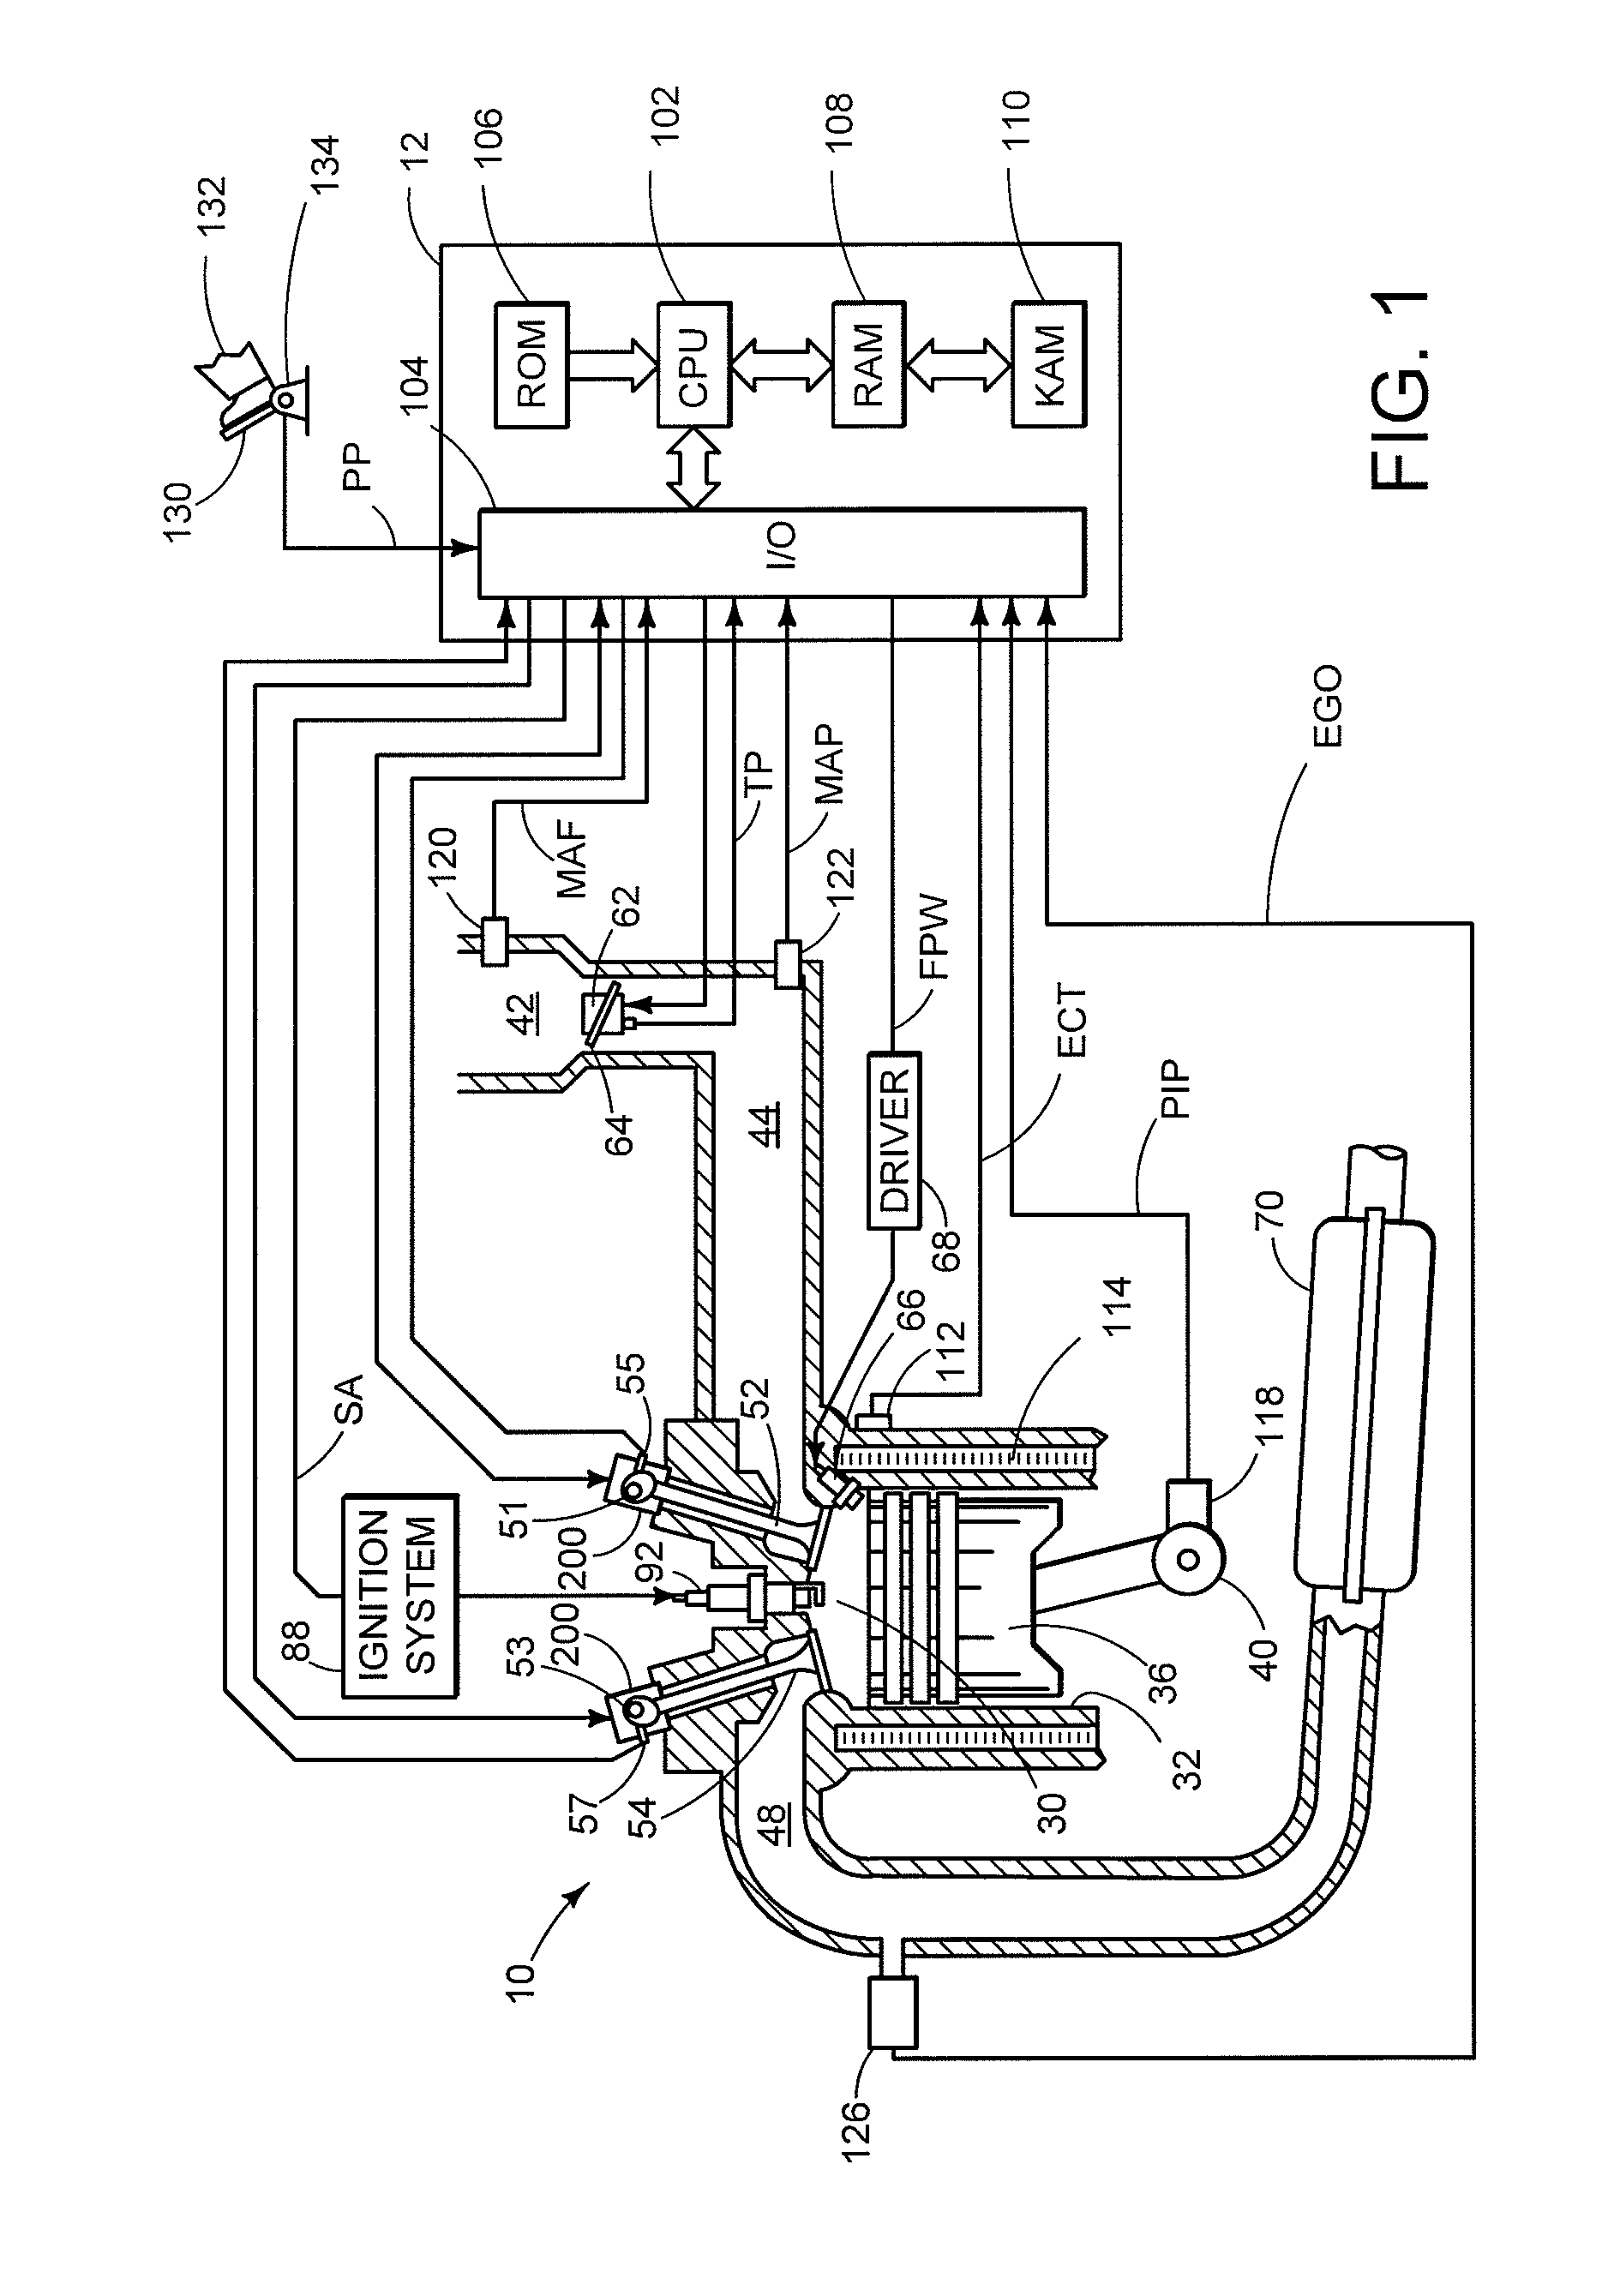 Feed Forward Control for Electric Variable Valve Operation